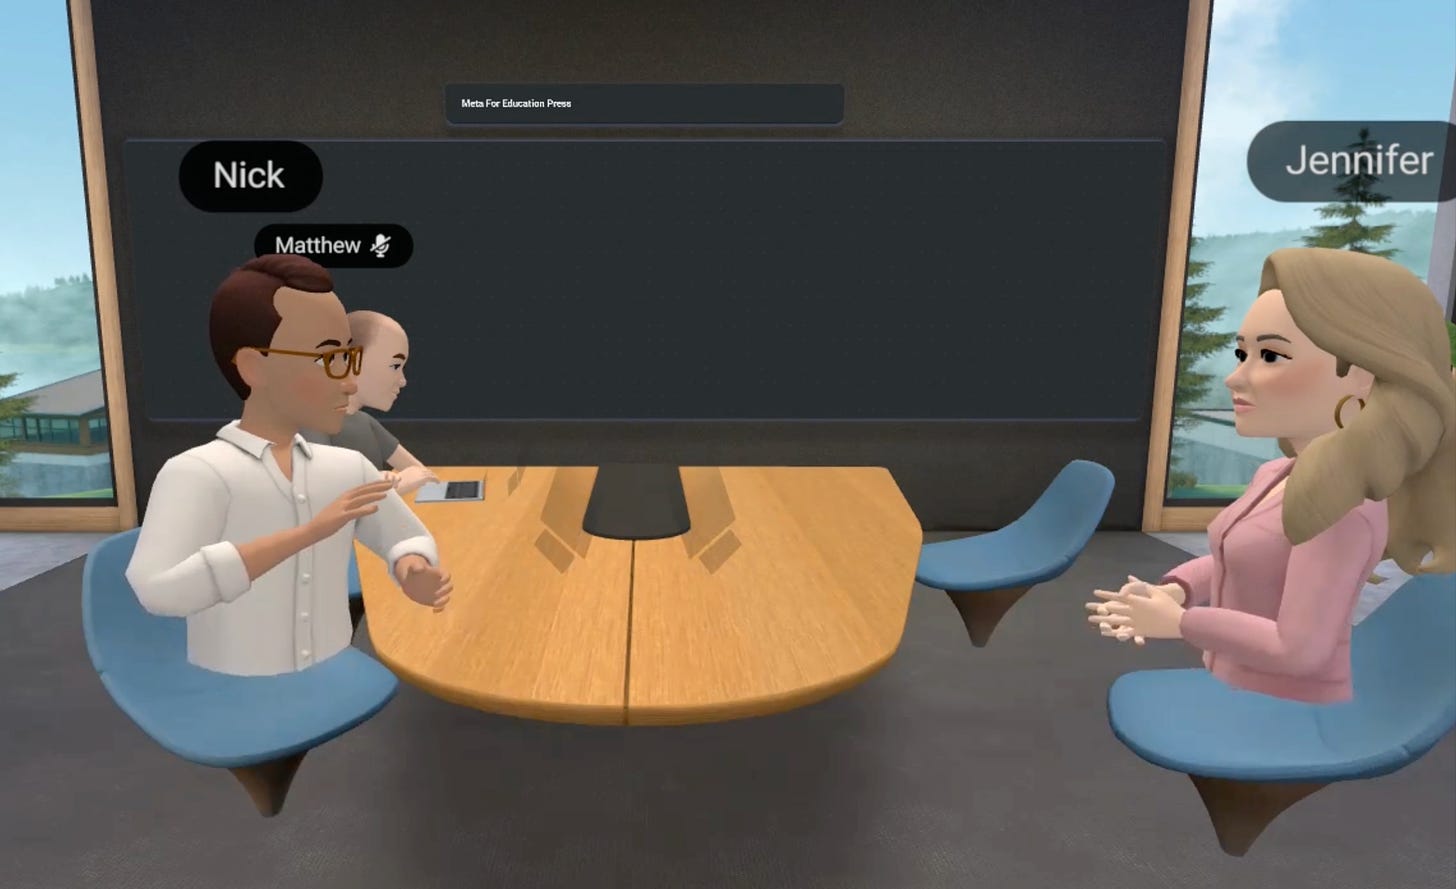 A screenshot from the metaverse shows the avatars of Nick Clegg of Meta and Jennifer Kingson of Axios.